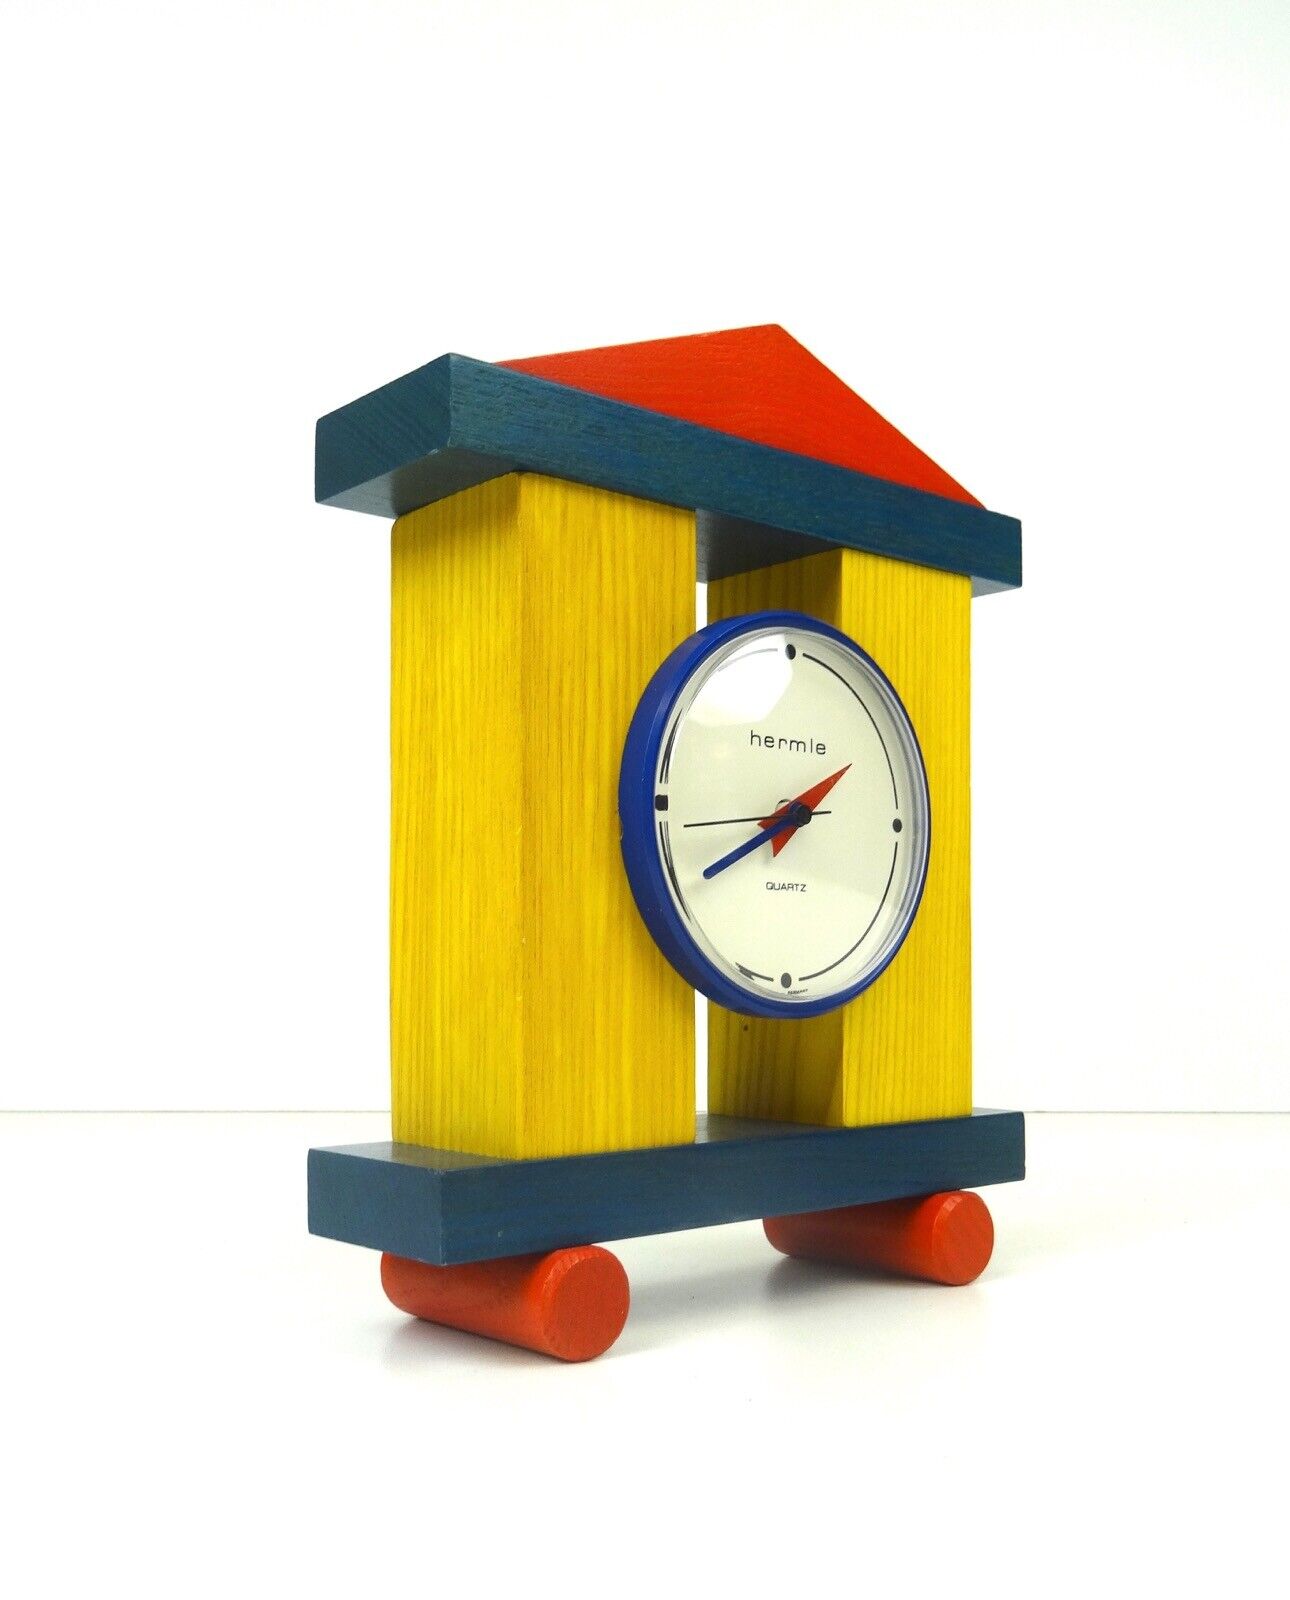 VERY RARE POSTMODERN 80S PRIMARY COLORS VINTAGE MEMPHIS AGE DESK CLOCK BY HERMLE